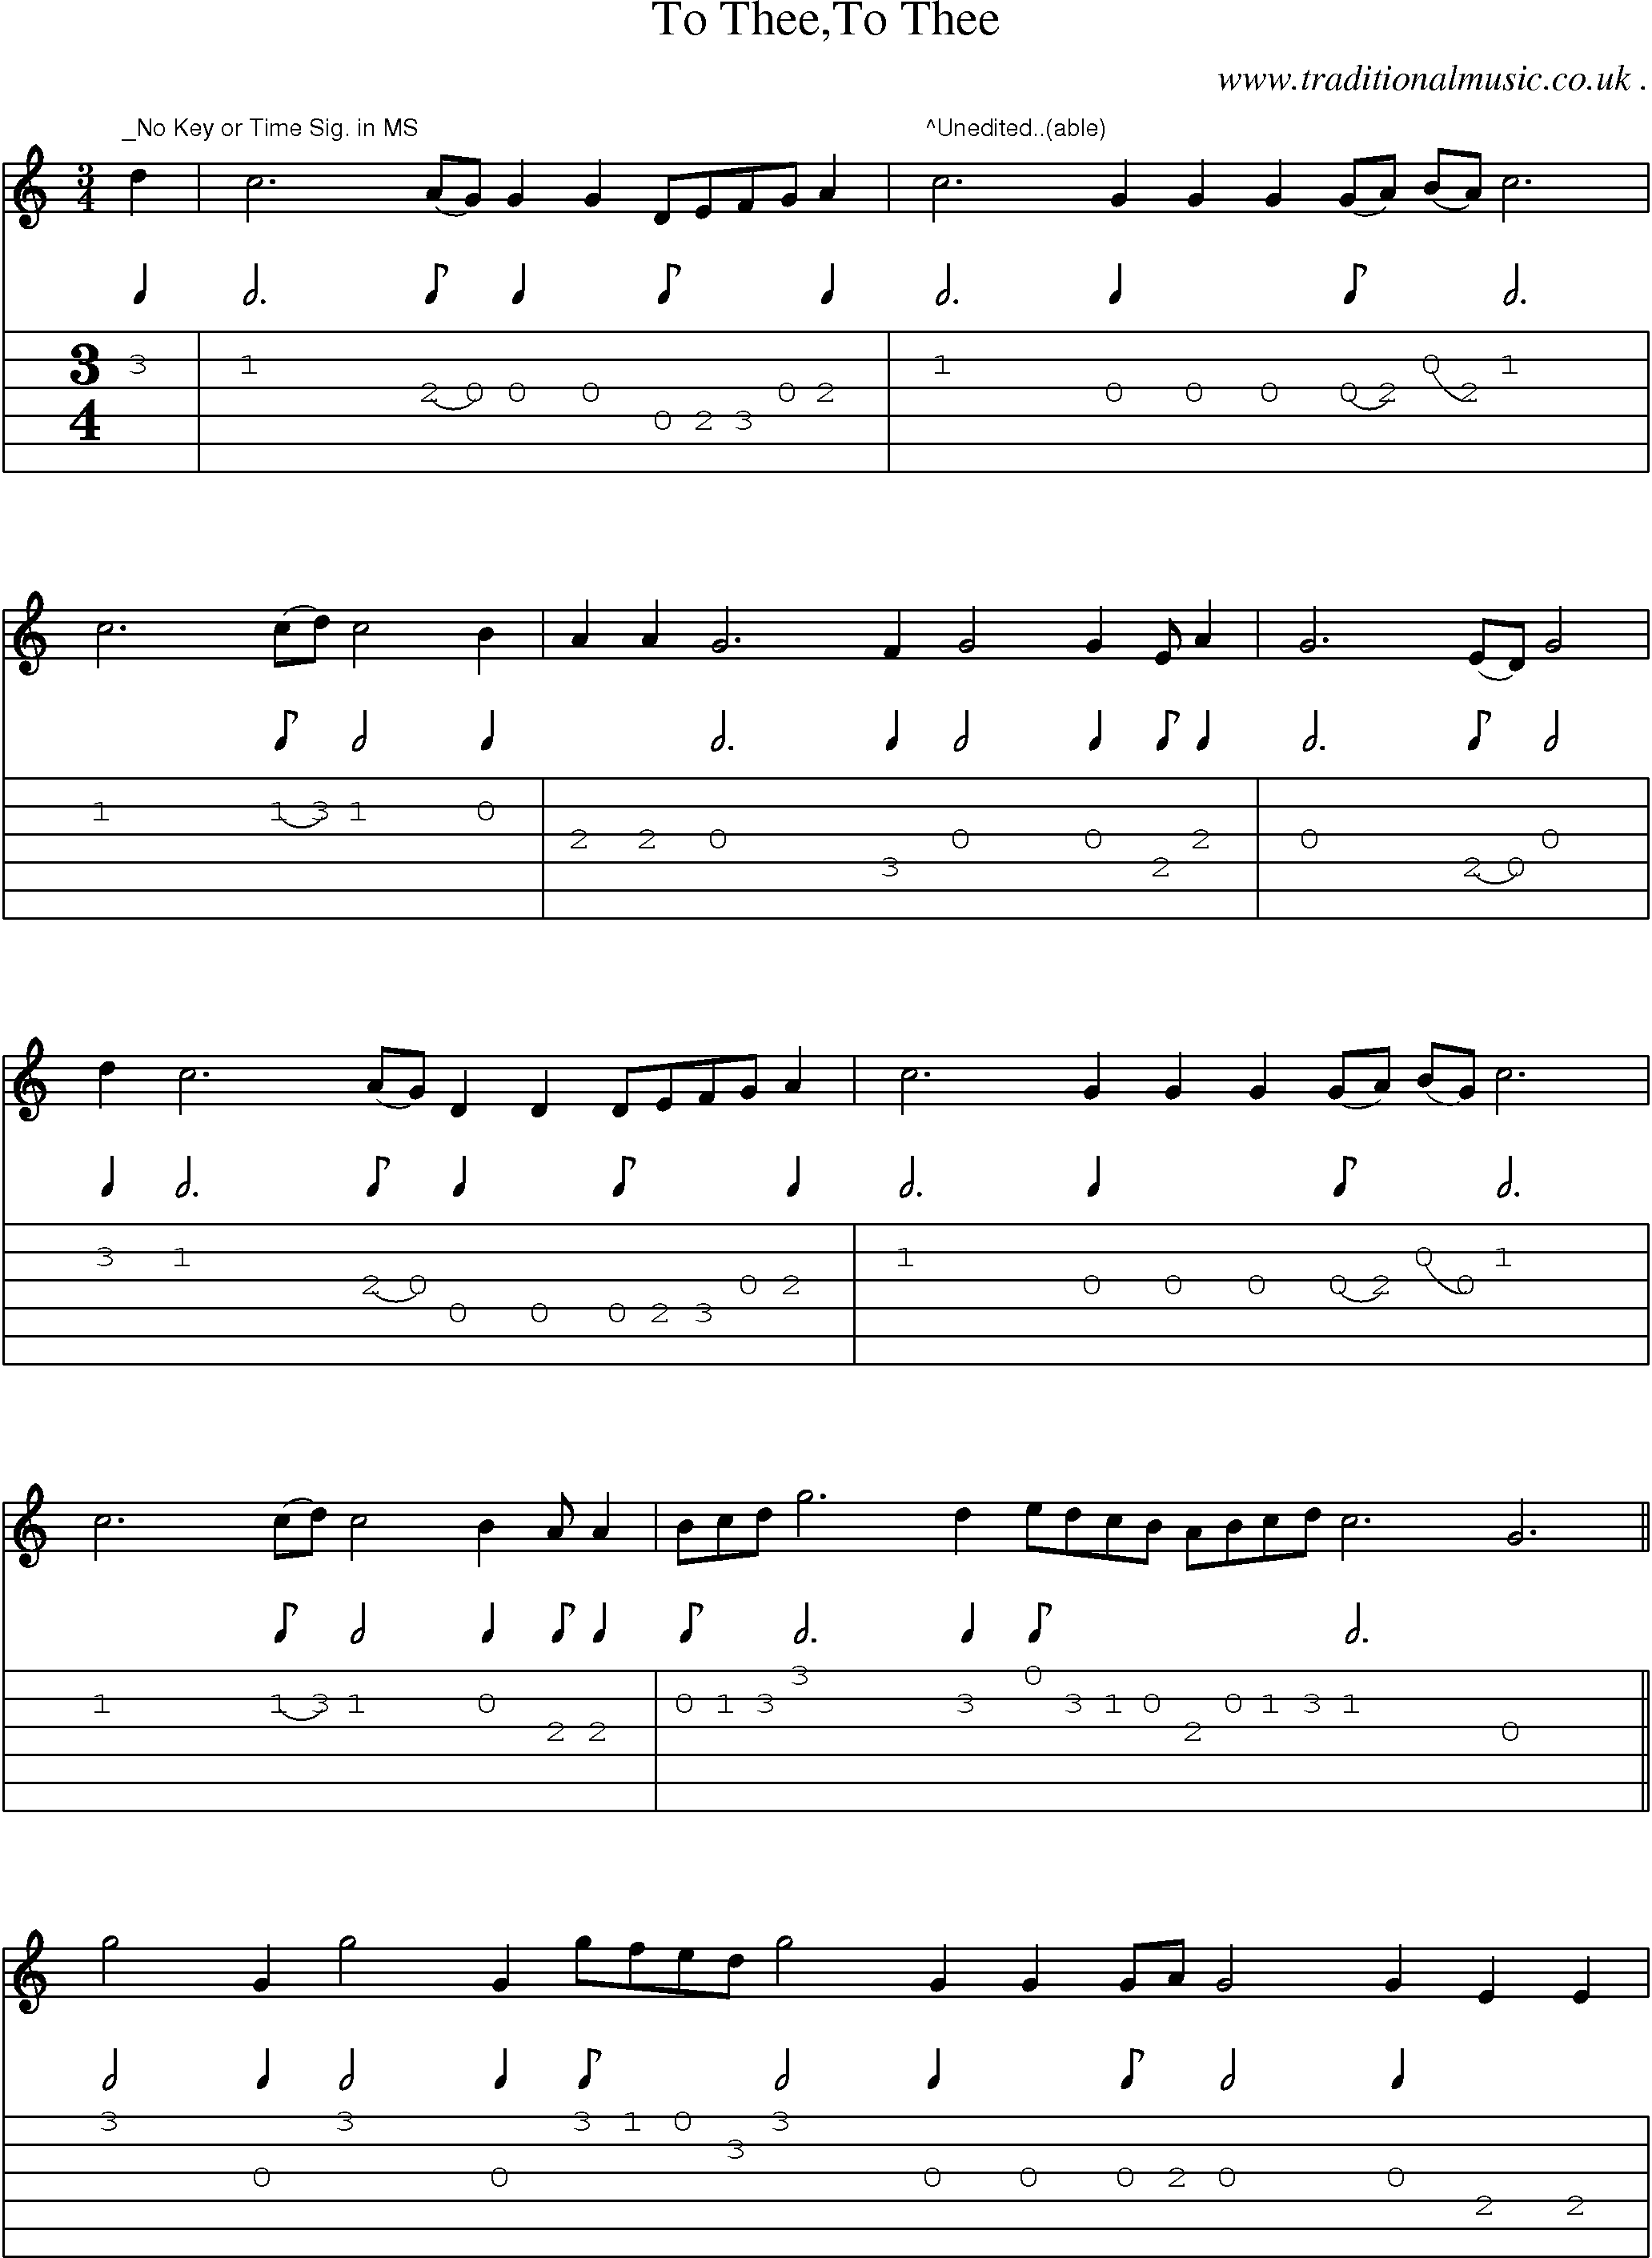 Sheet-Music and Guitar Tabs for To Theeto Thee